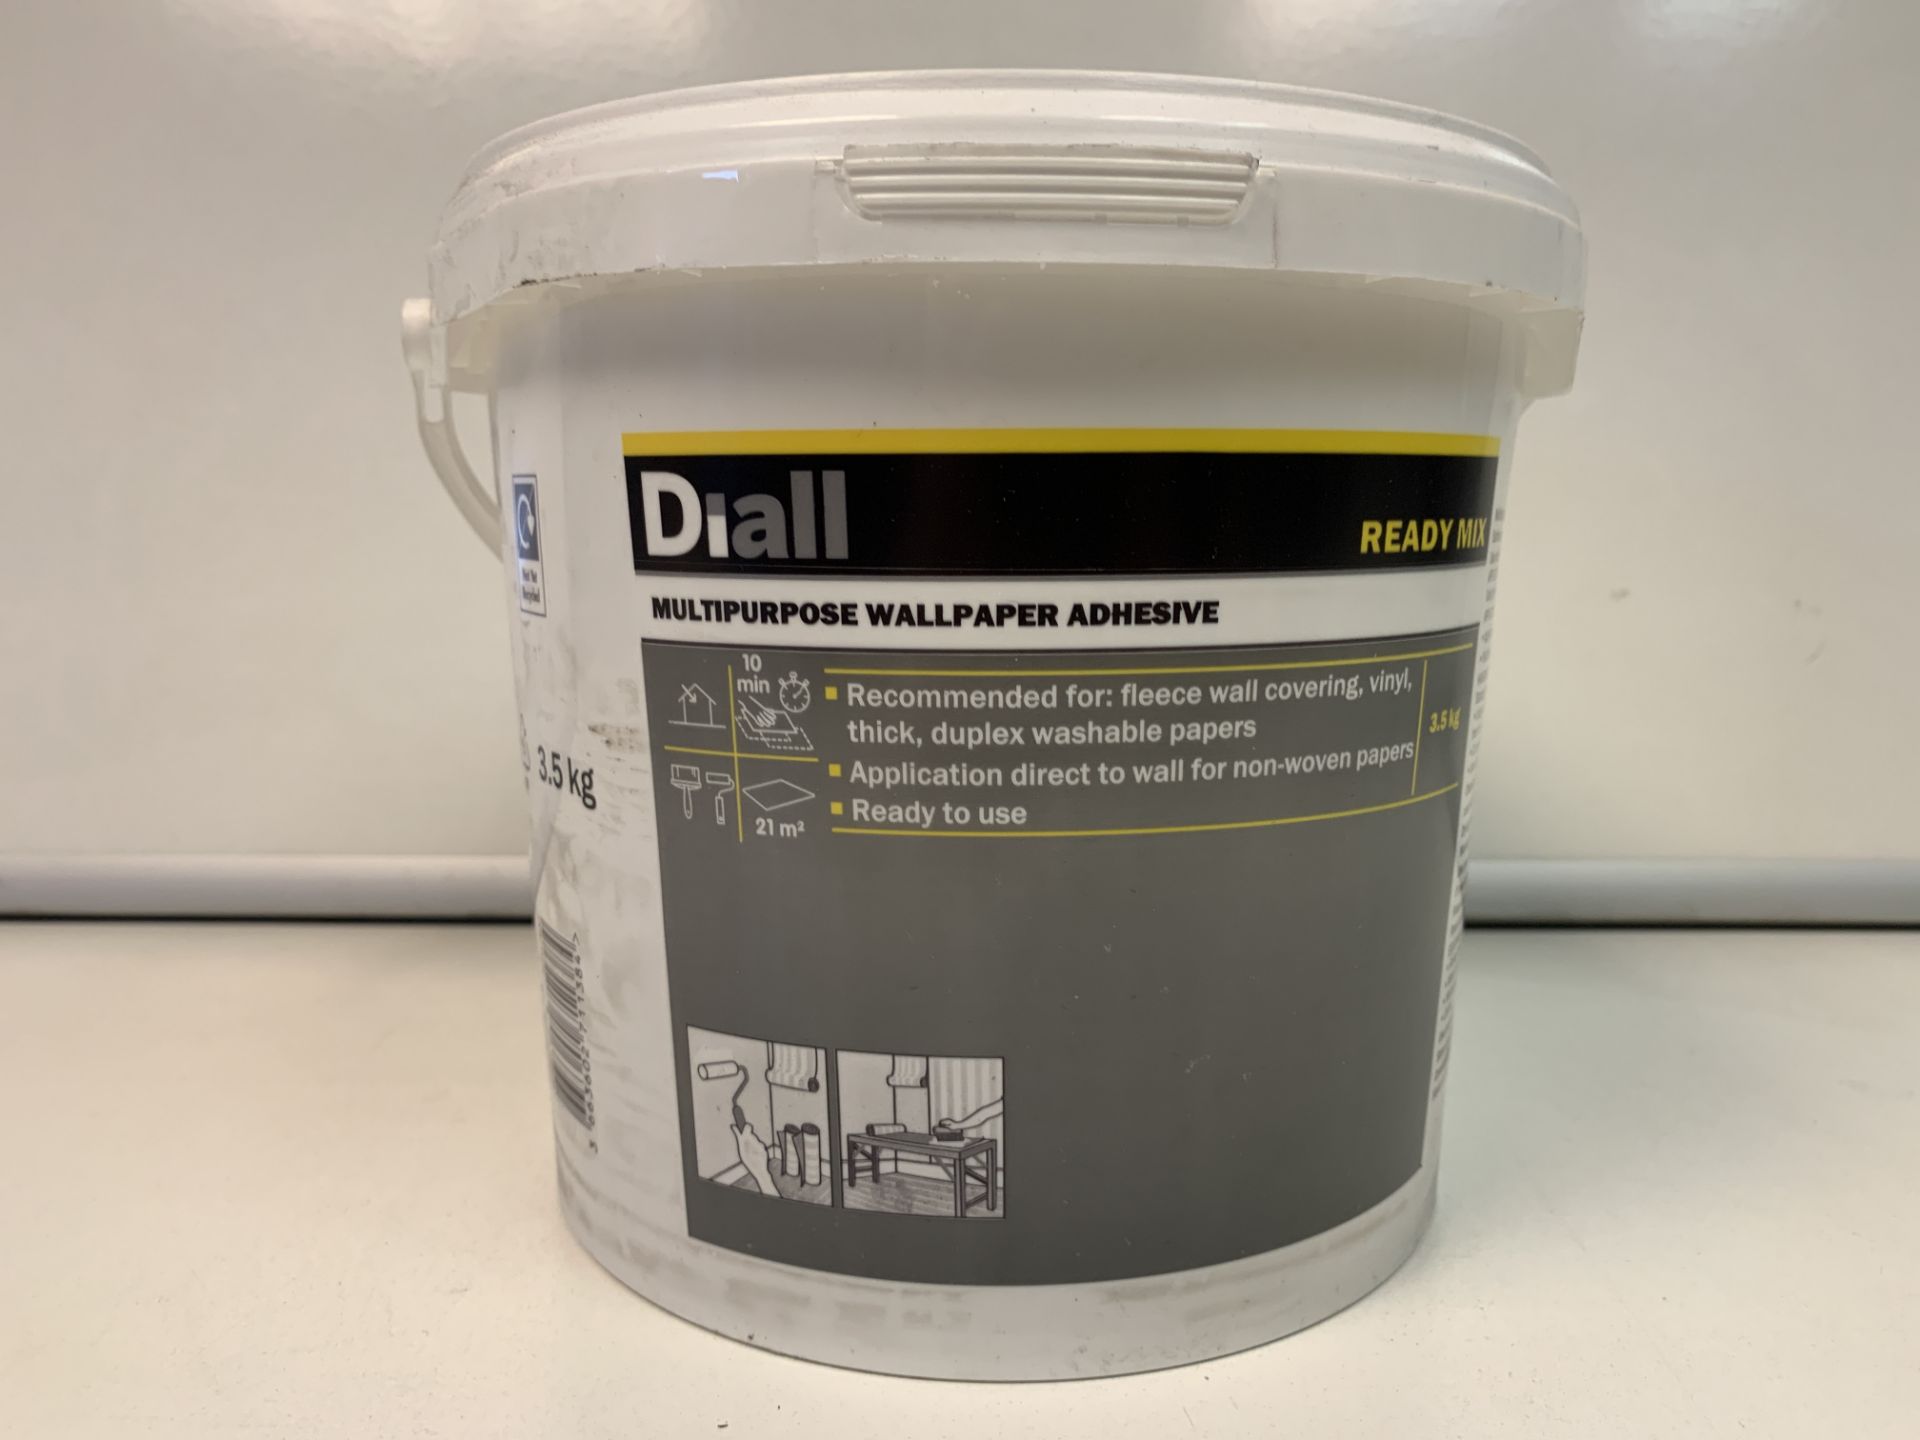 20 X NEW 3.5KG TUBS OF DIALL MULTIPURPOSE WALLPAPER ADHESIVE - READY MIXED.